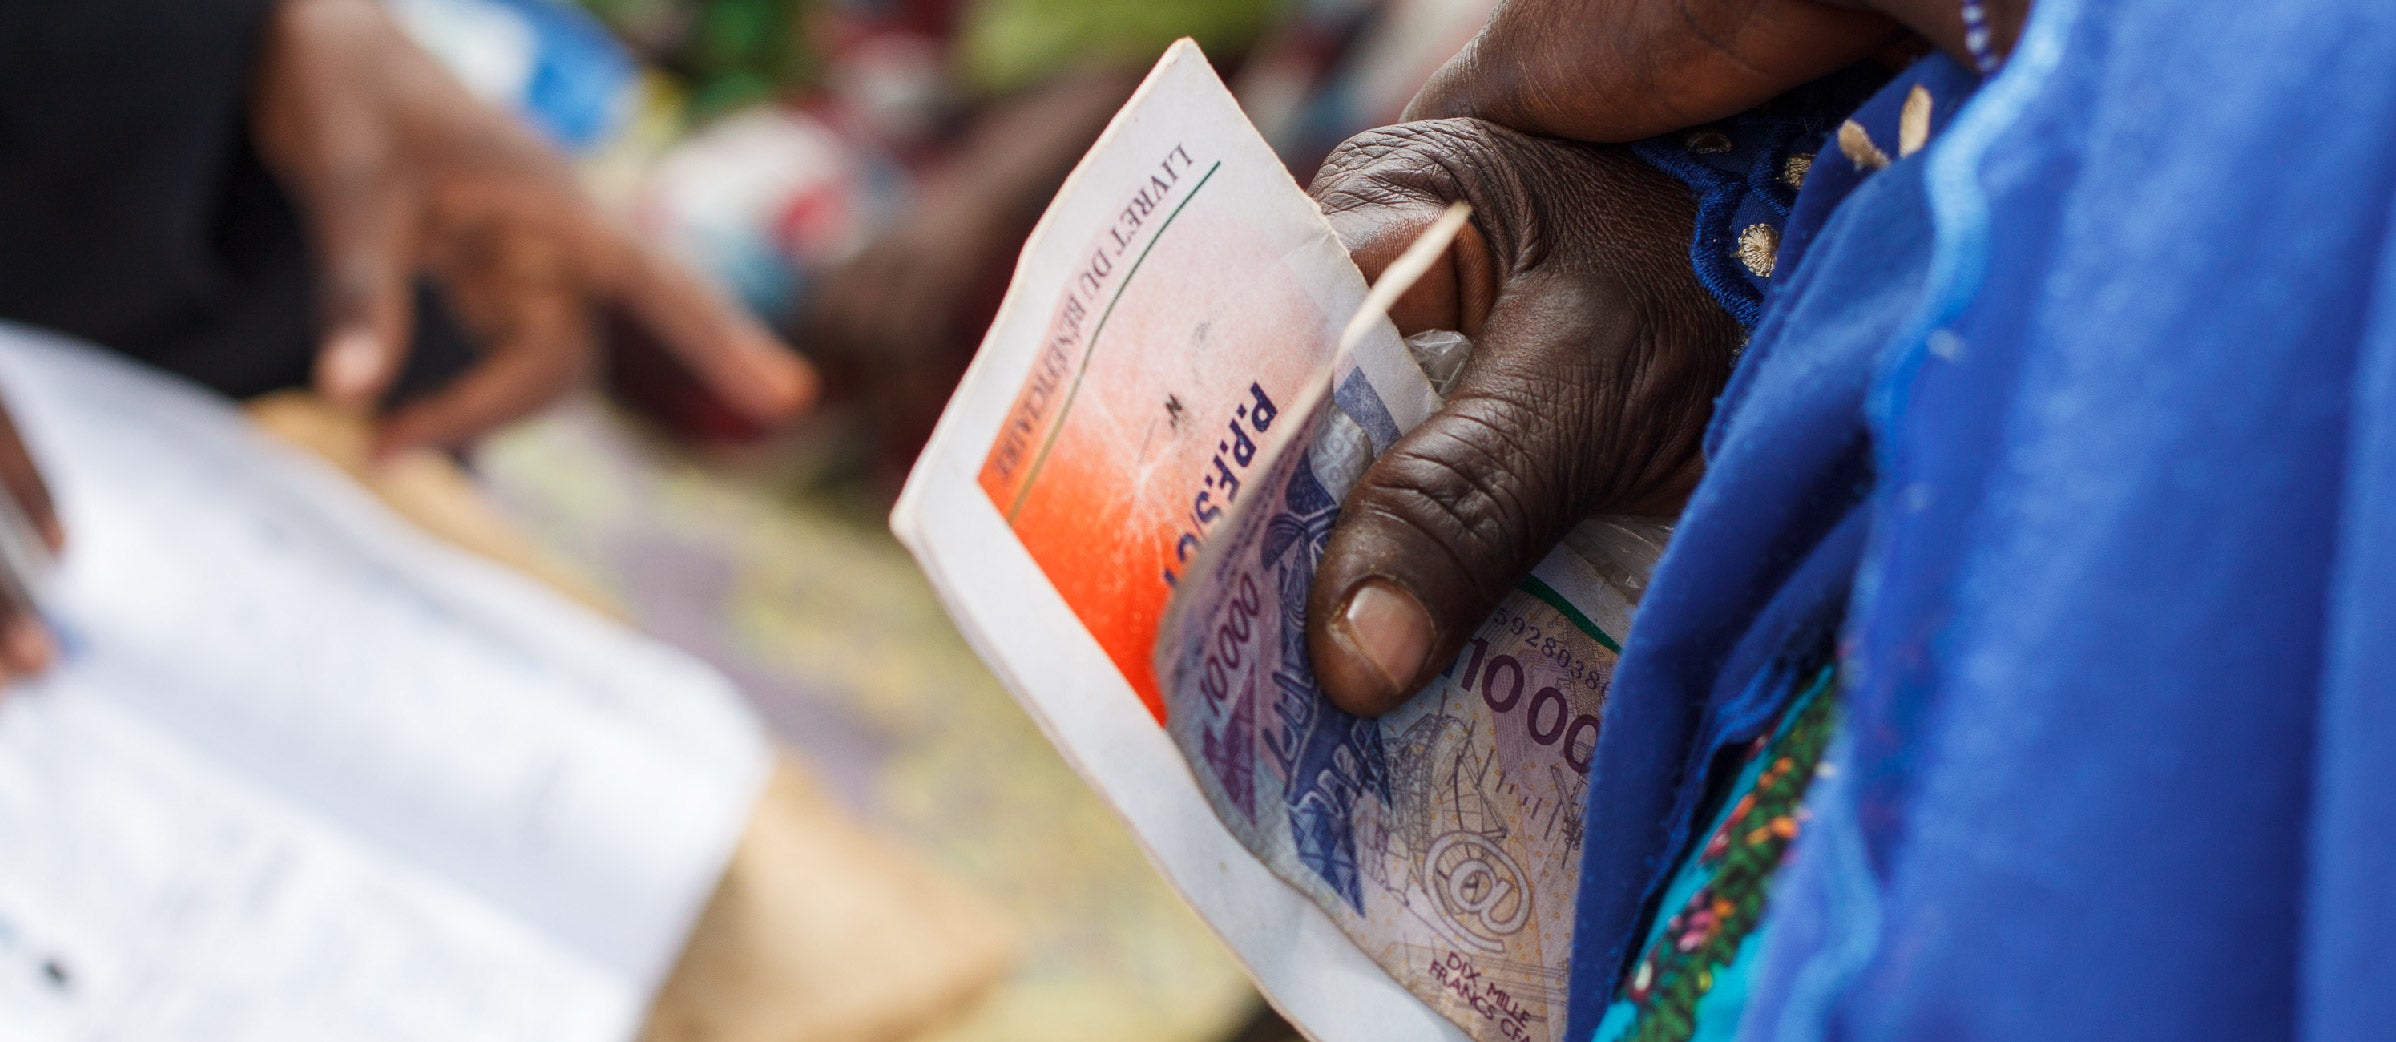 A growing body of evidence finds that cash transfers reduce violence against women and children. Photo: Sarah Farhat/ The World Bank